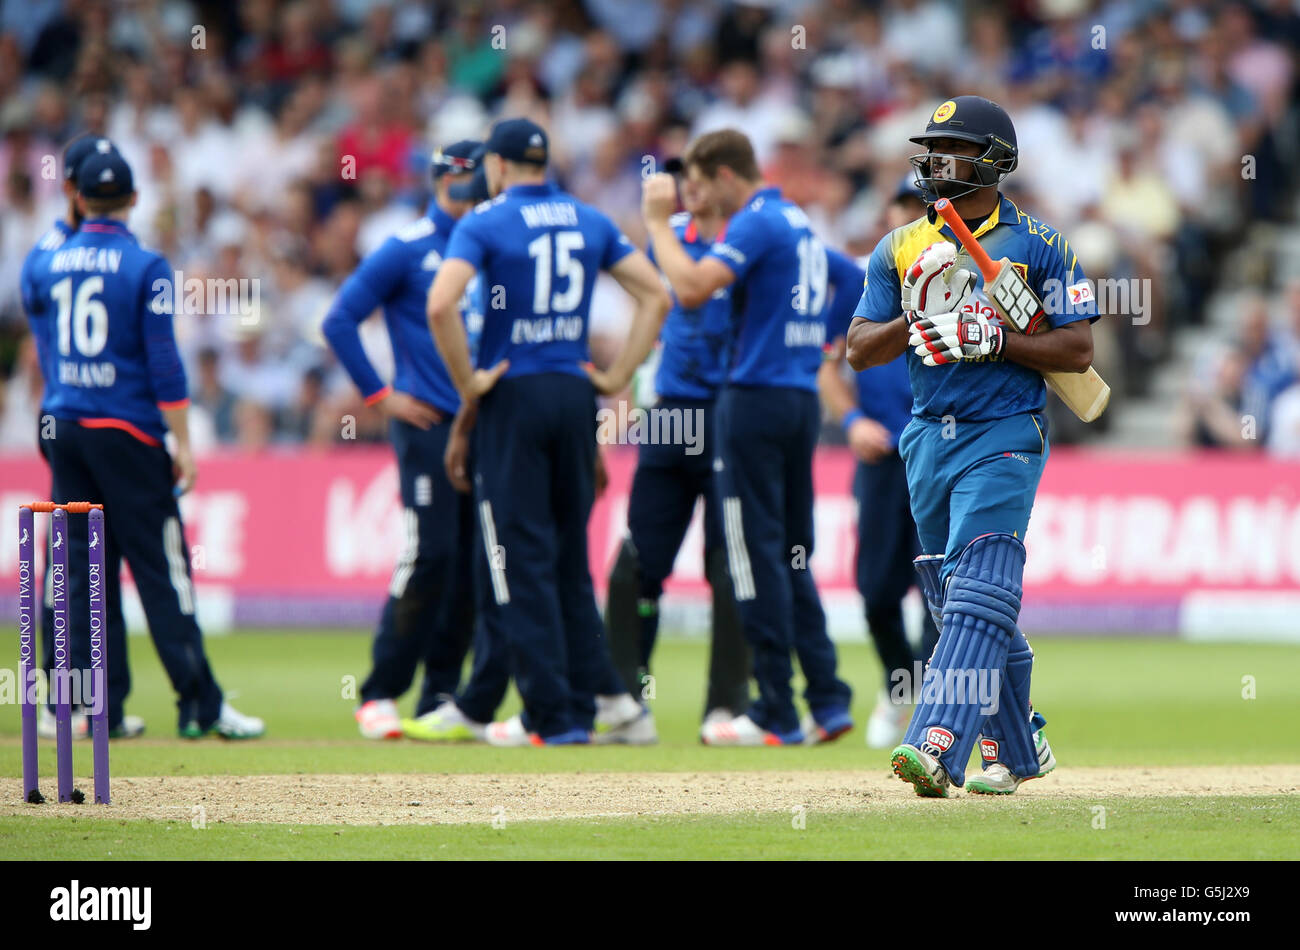 Sri Lanka's Seekkuge Prasanna walks off after being dismissed by England's Chris Woakes during the First One Day International at Trent Bridge, Nottingham. Stock Photo